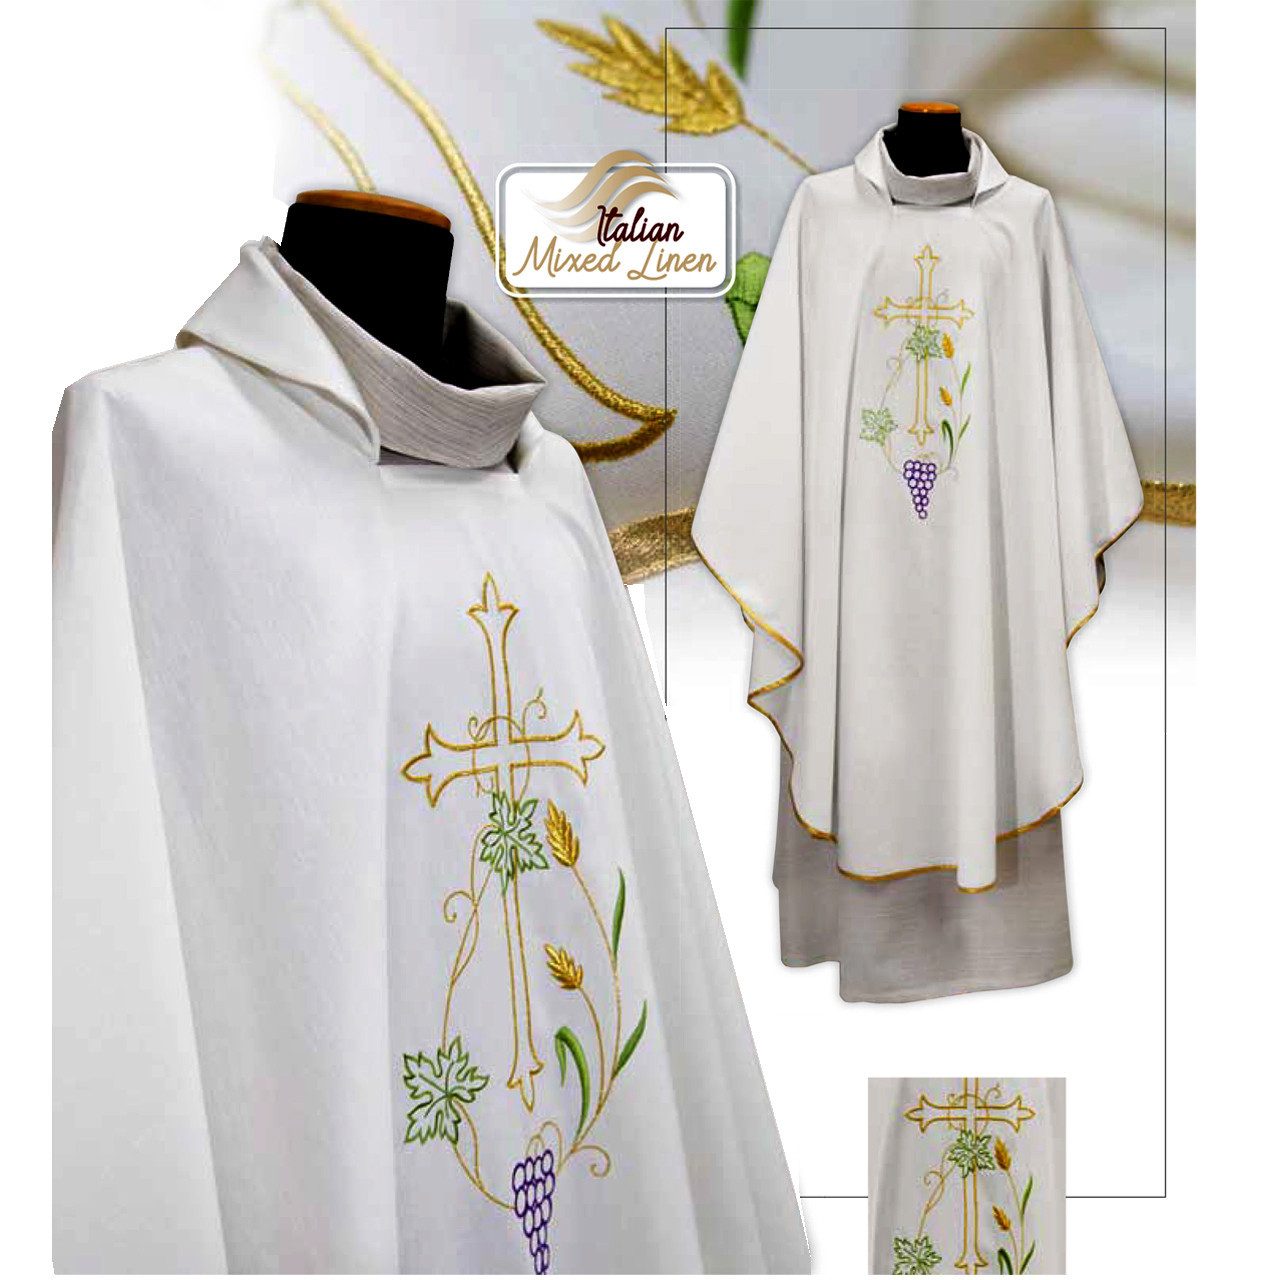 560 White Chasuble in Mixed-Linen